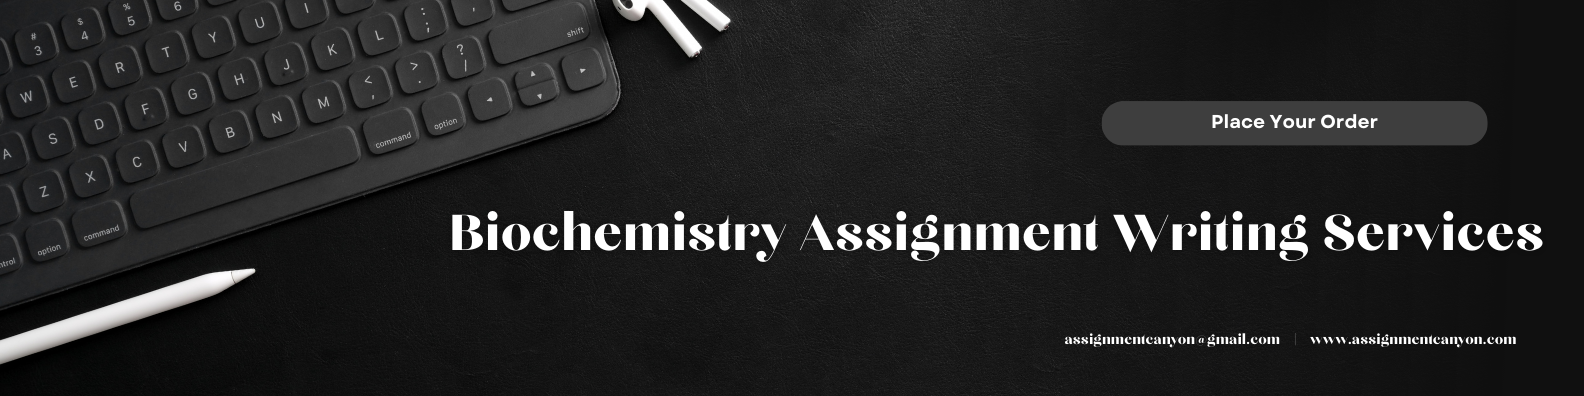 Get Biochemistry Assignment Writing Services From Professional Writers - Assignment Canyon